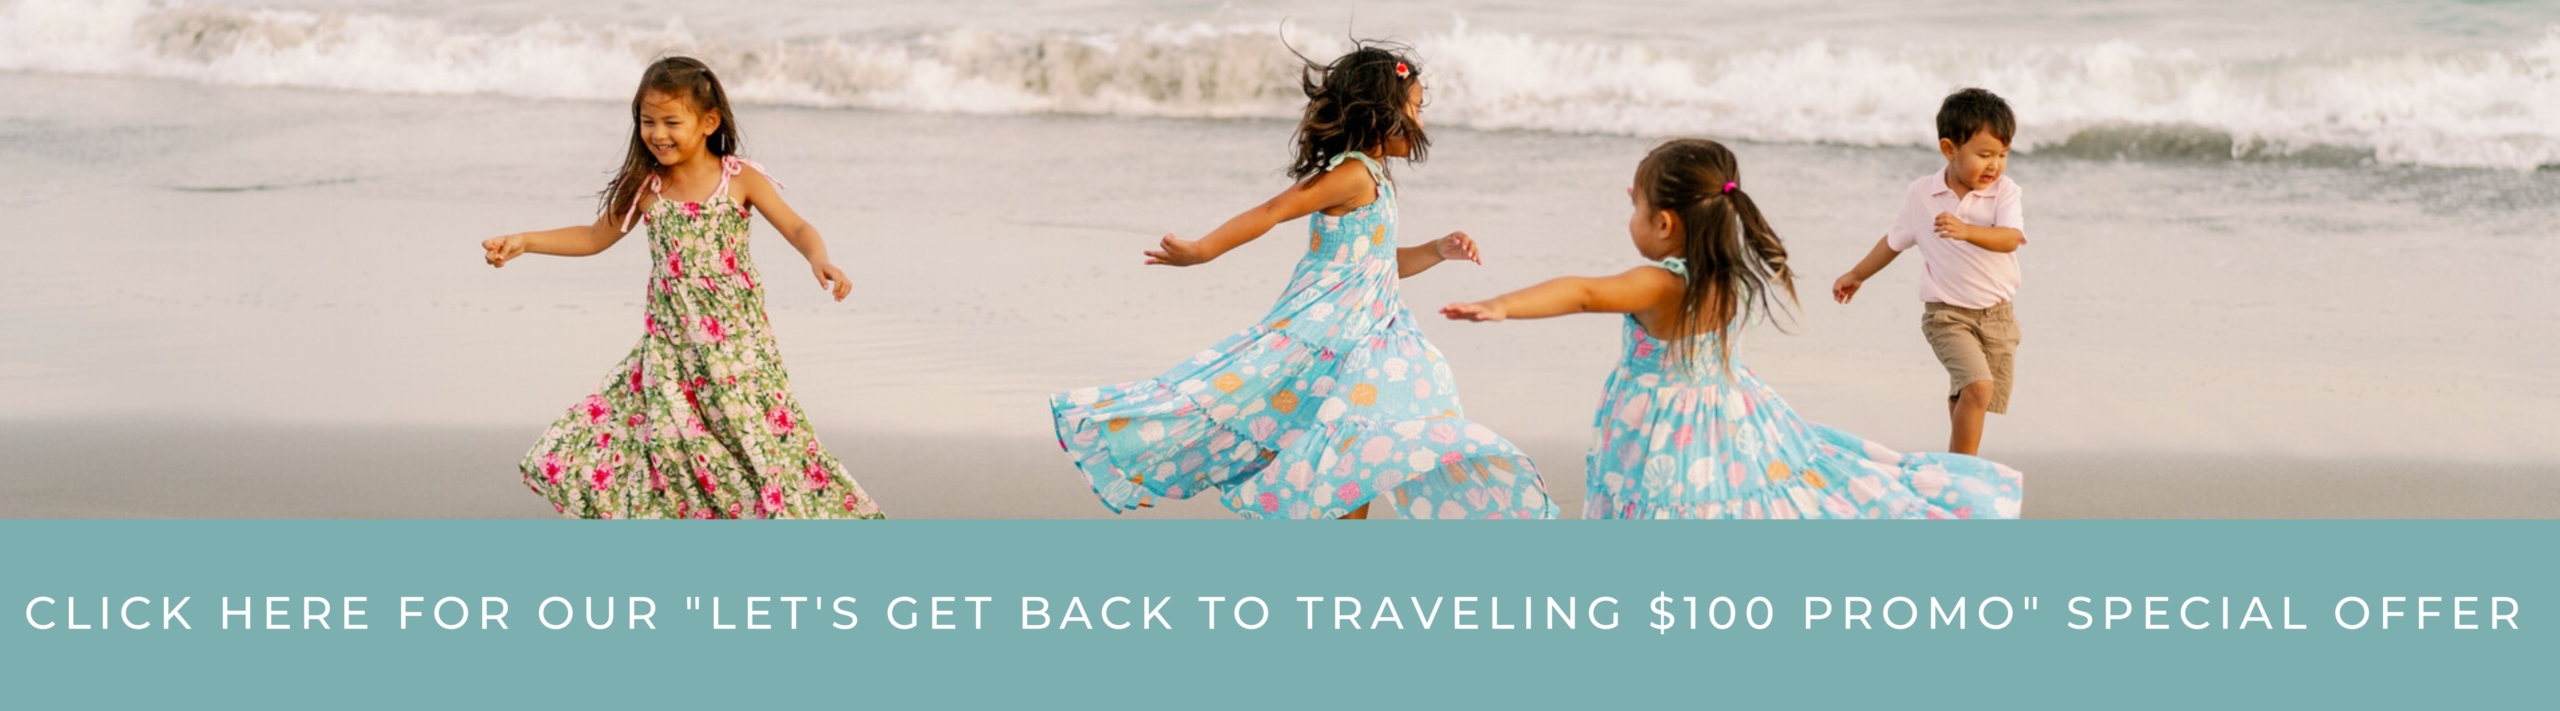 $100 off promo for let's get back to traveling